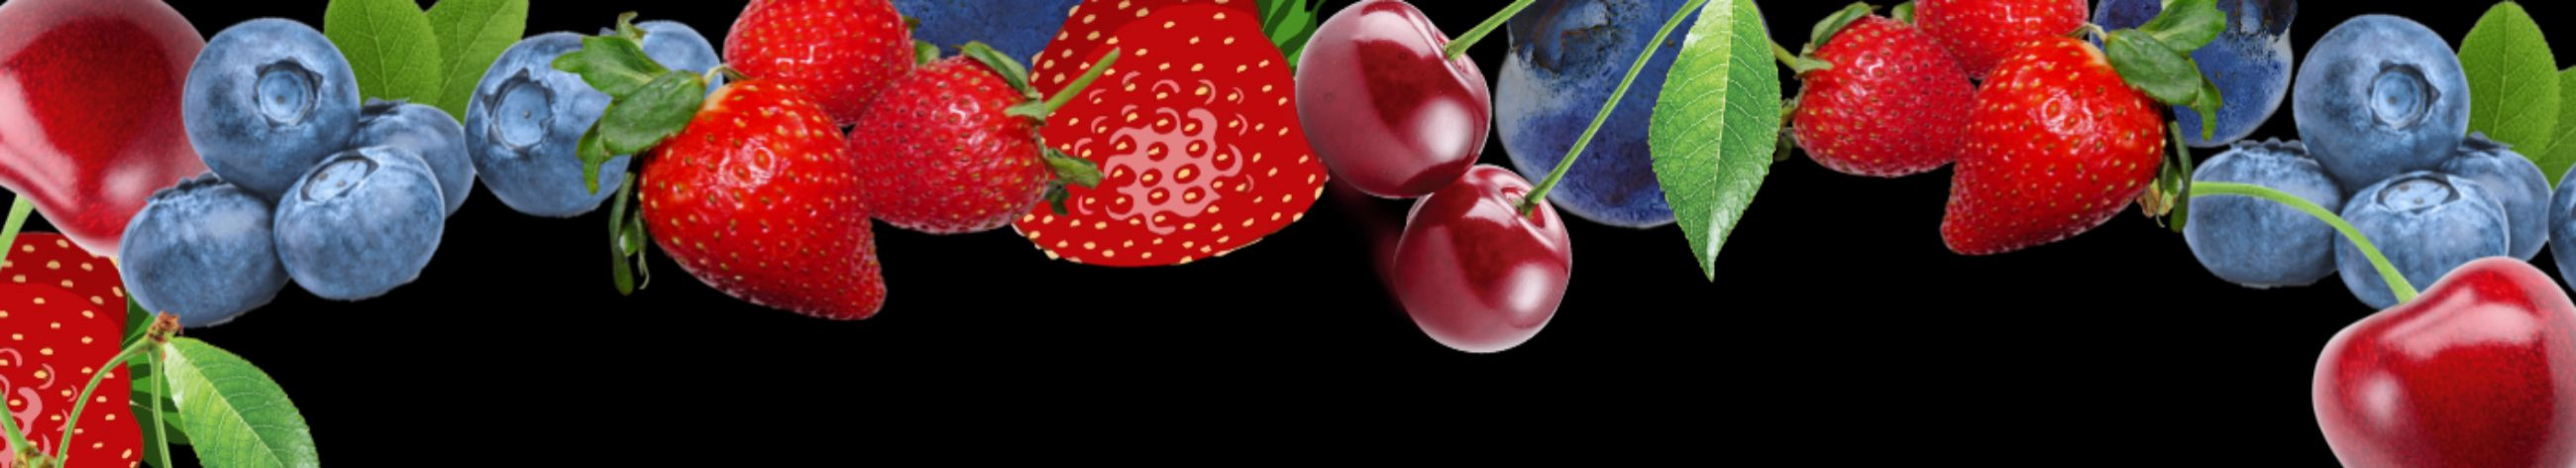 crop production, strawberries, culture blueberries, raspberries and concerns, Estonian strawberries, foreign strawberries, Fresh peas, fresh raspberries, fresh blueberries of culture, Fresh Concerns